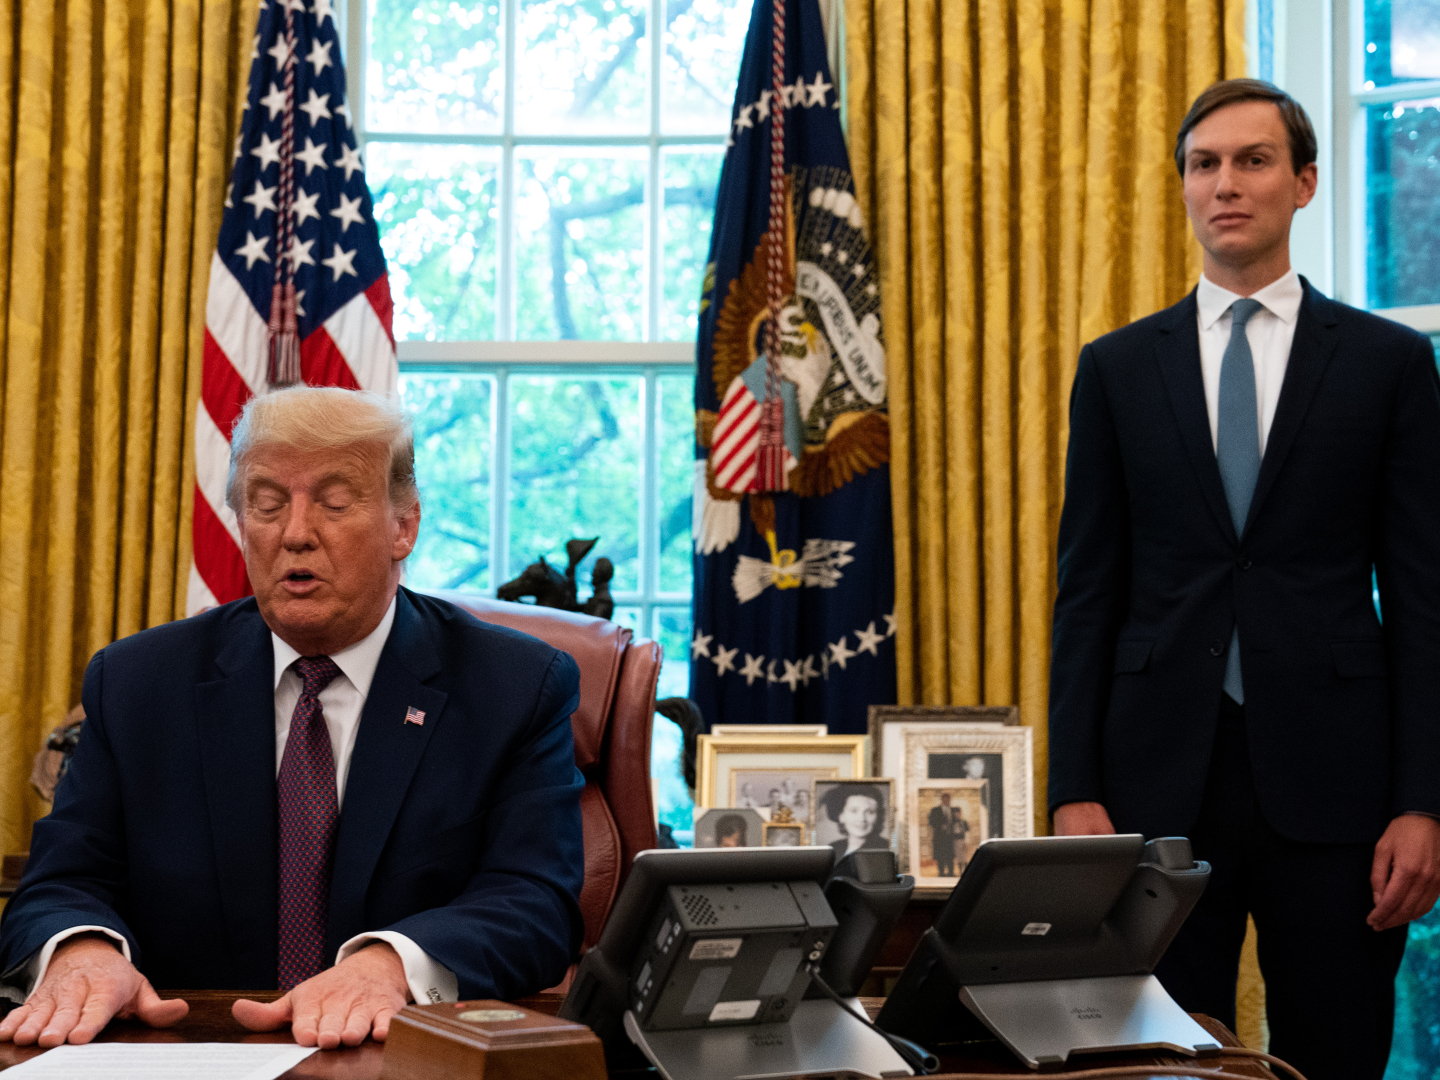 Donald Trump and Jared Kushner in the Oval Office. Photo: Anna Moneymaker / Pool / CNP / Newscom / The Mega Agency